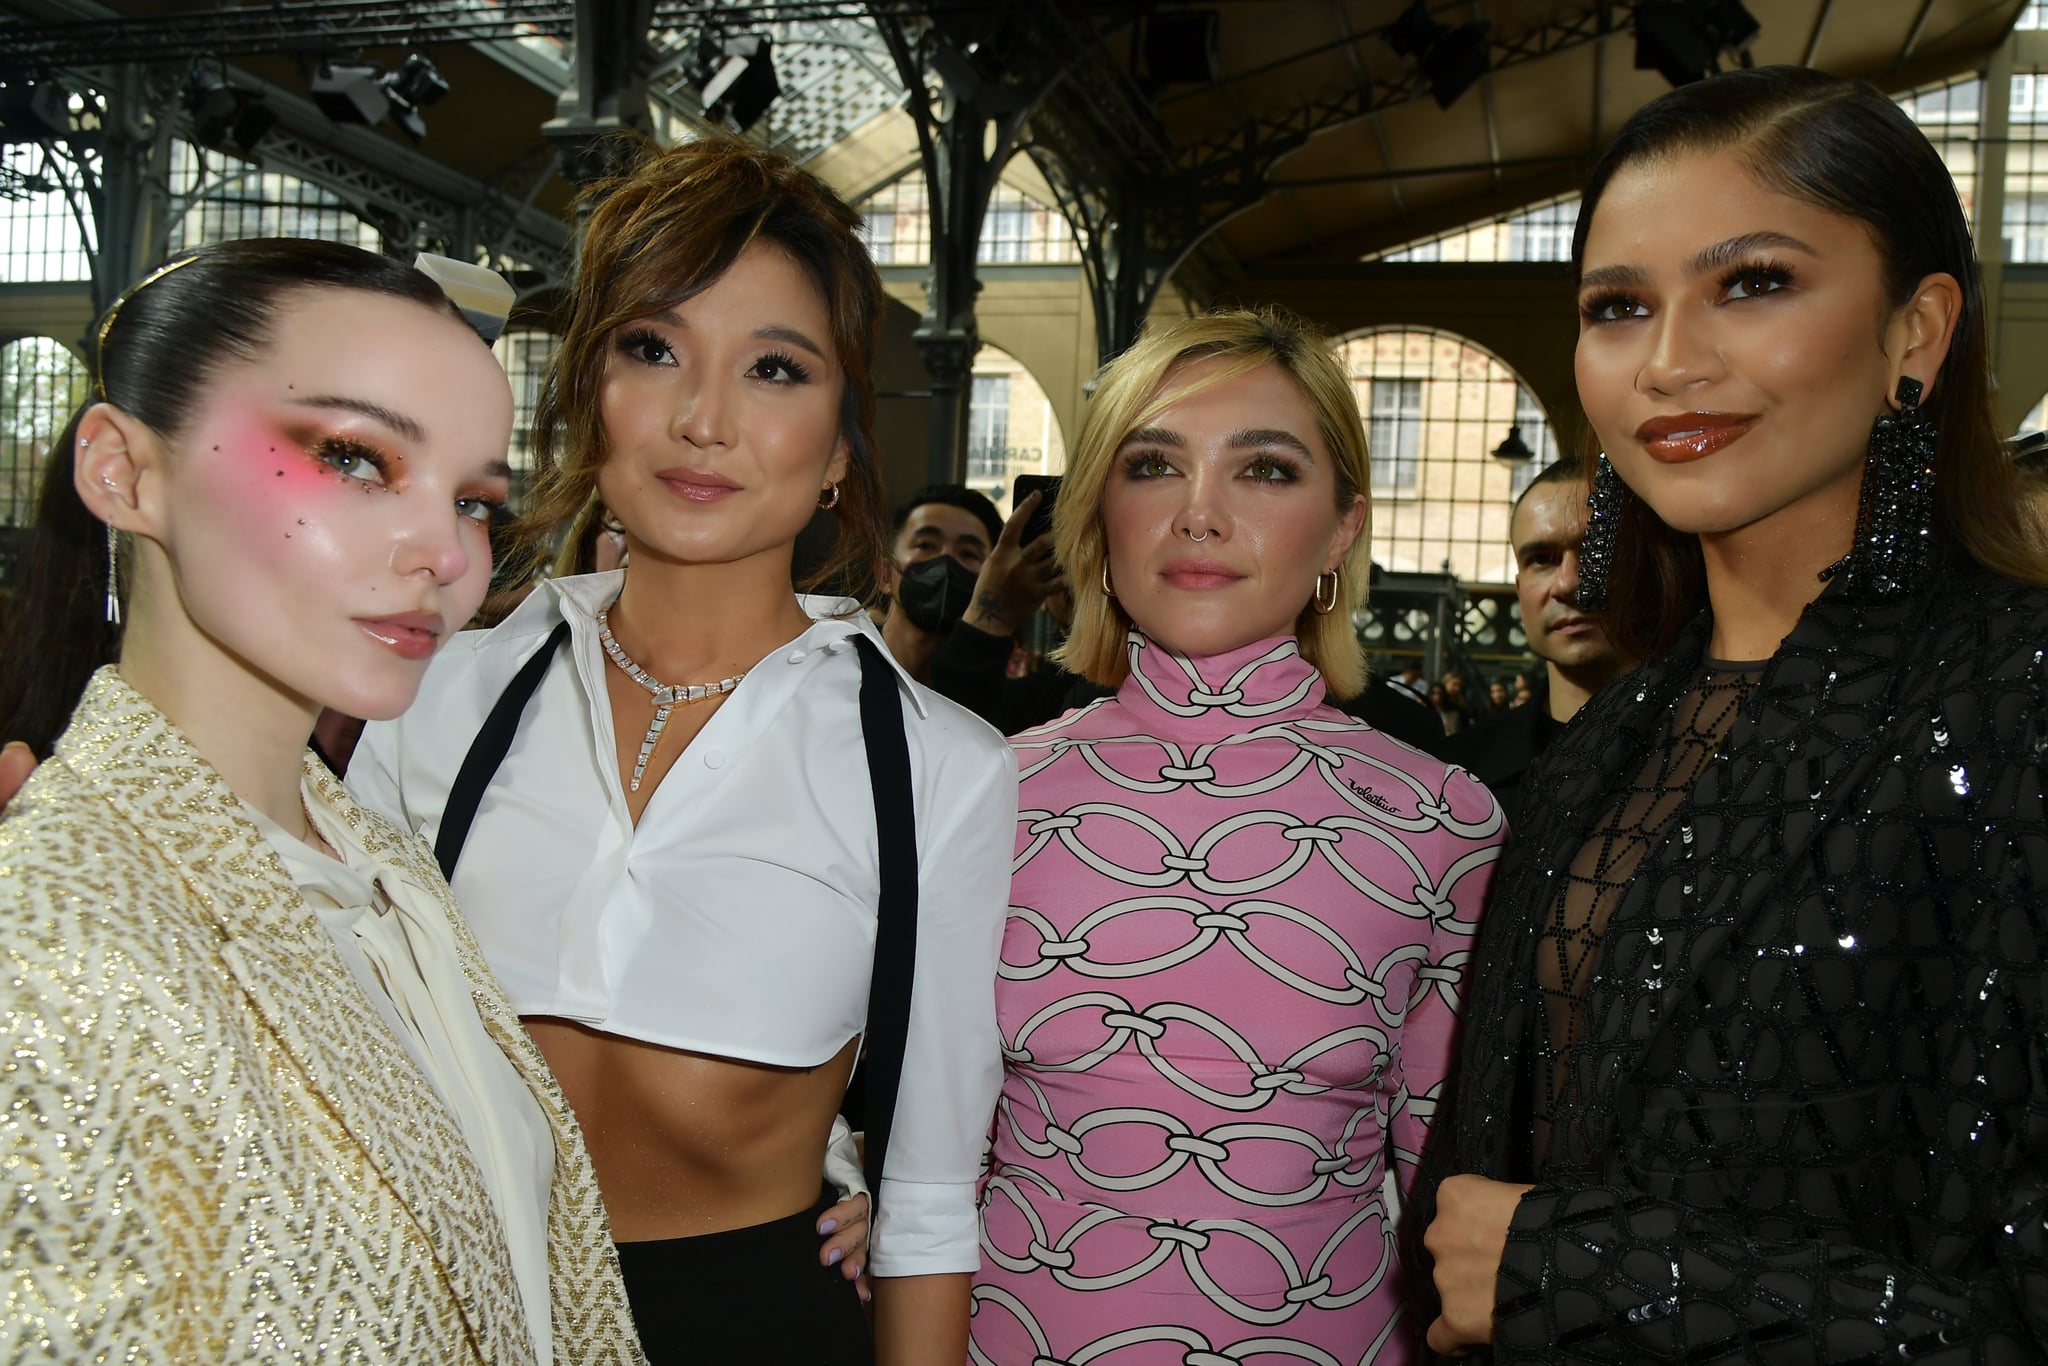 PARIS, FRANCE - OCTOBER 02: (EDITORIAL USE ONLY - For Non-Editorial use please seek approval from Fashion House) (L-R)  Dove Cameron, Ashley Park, Florence Pugh and Zendaya attend the Valentino Womenswear Spring/Summer 2023 show as part of Paris Fashion Week  on October 02, 2022 in Paris, France. (Photo by Dominique Charriau/WireImage)